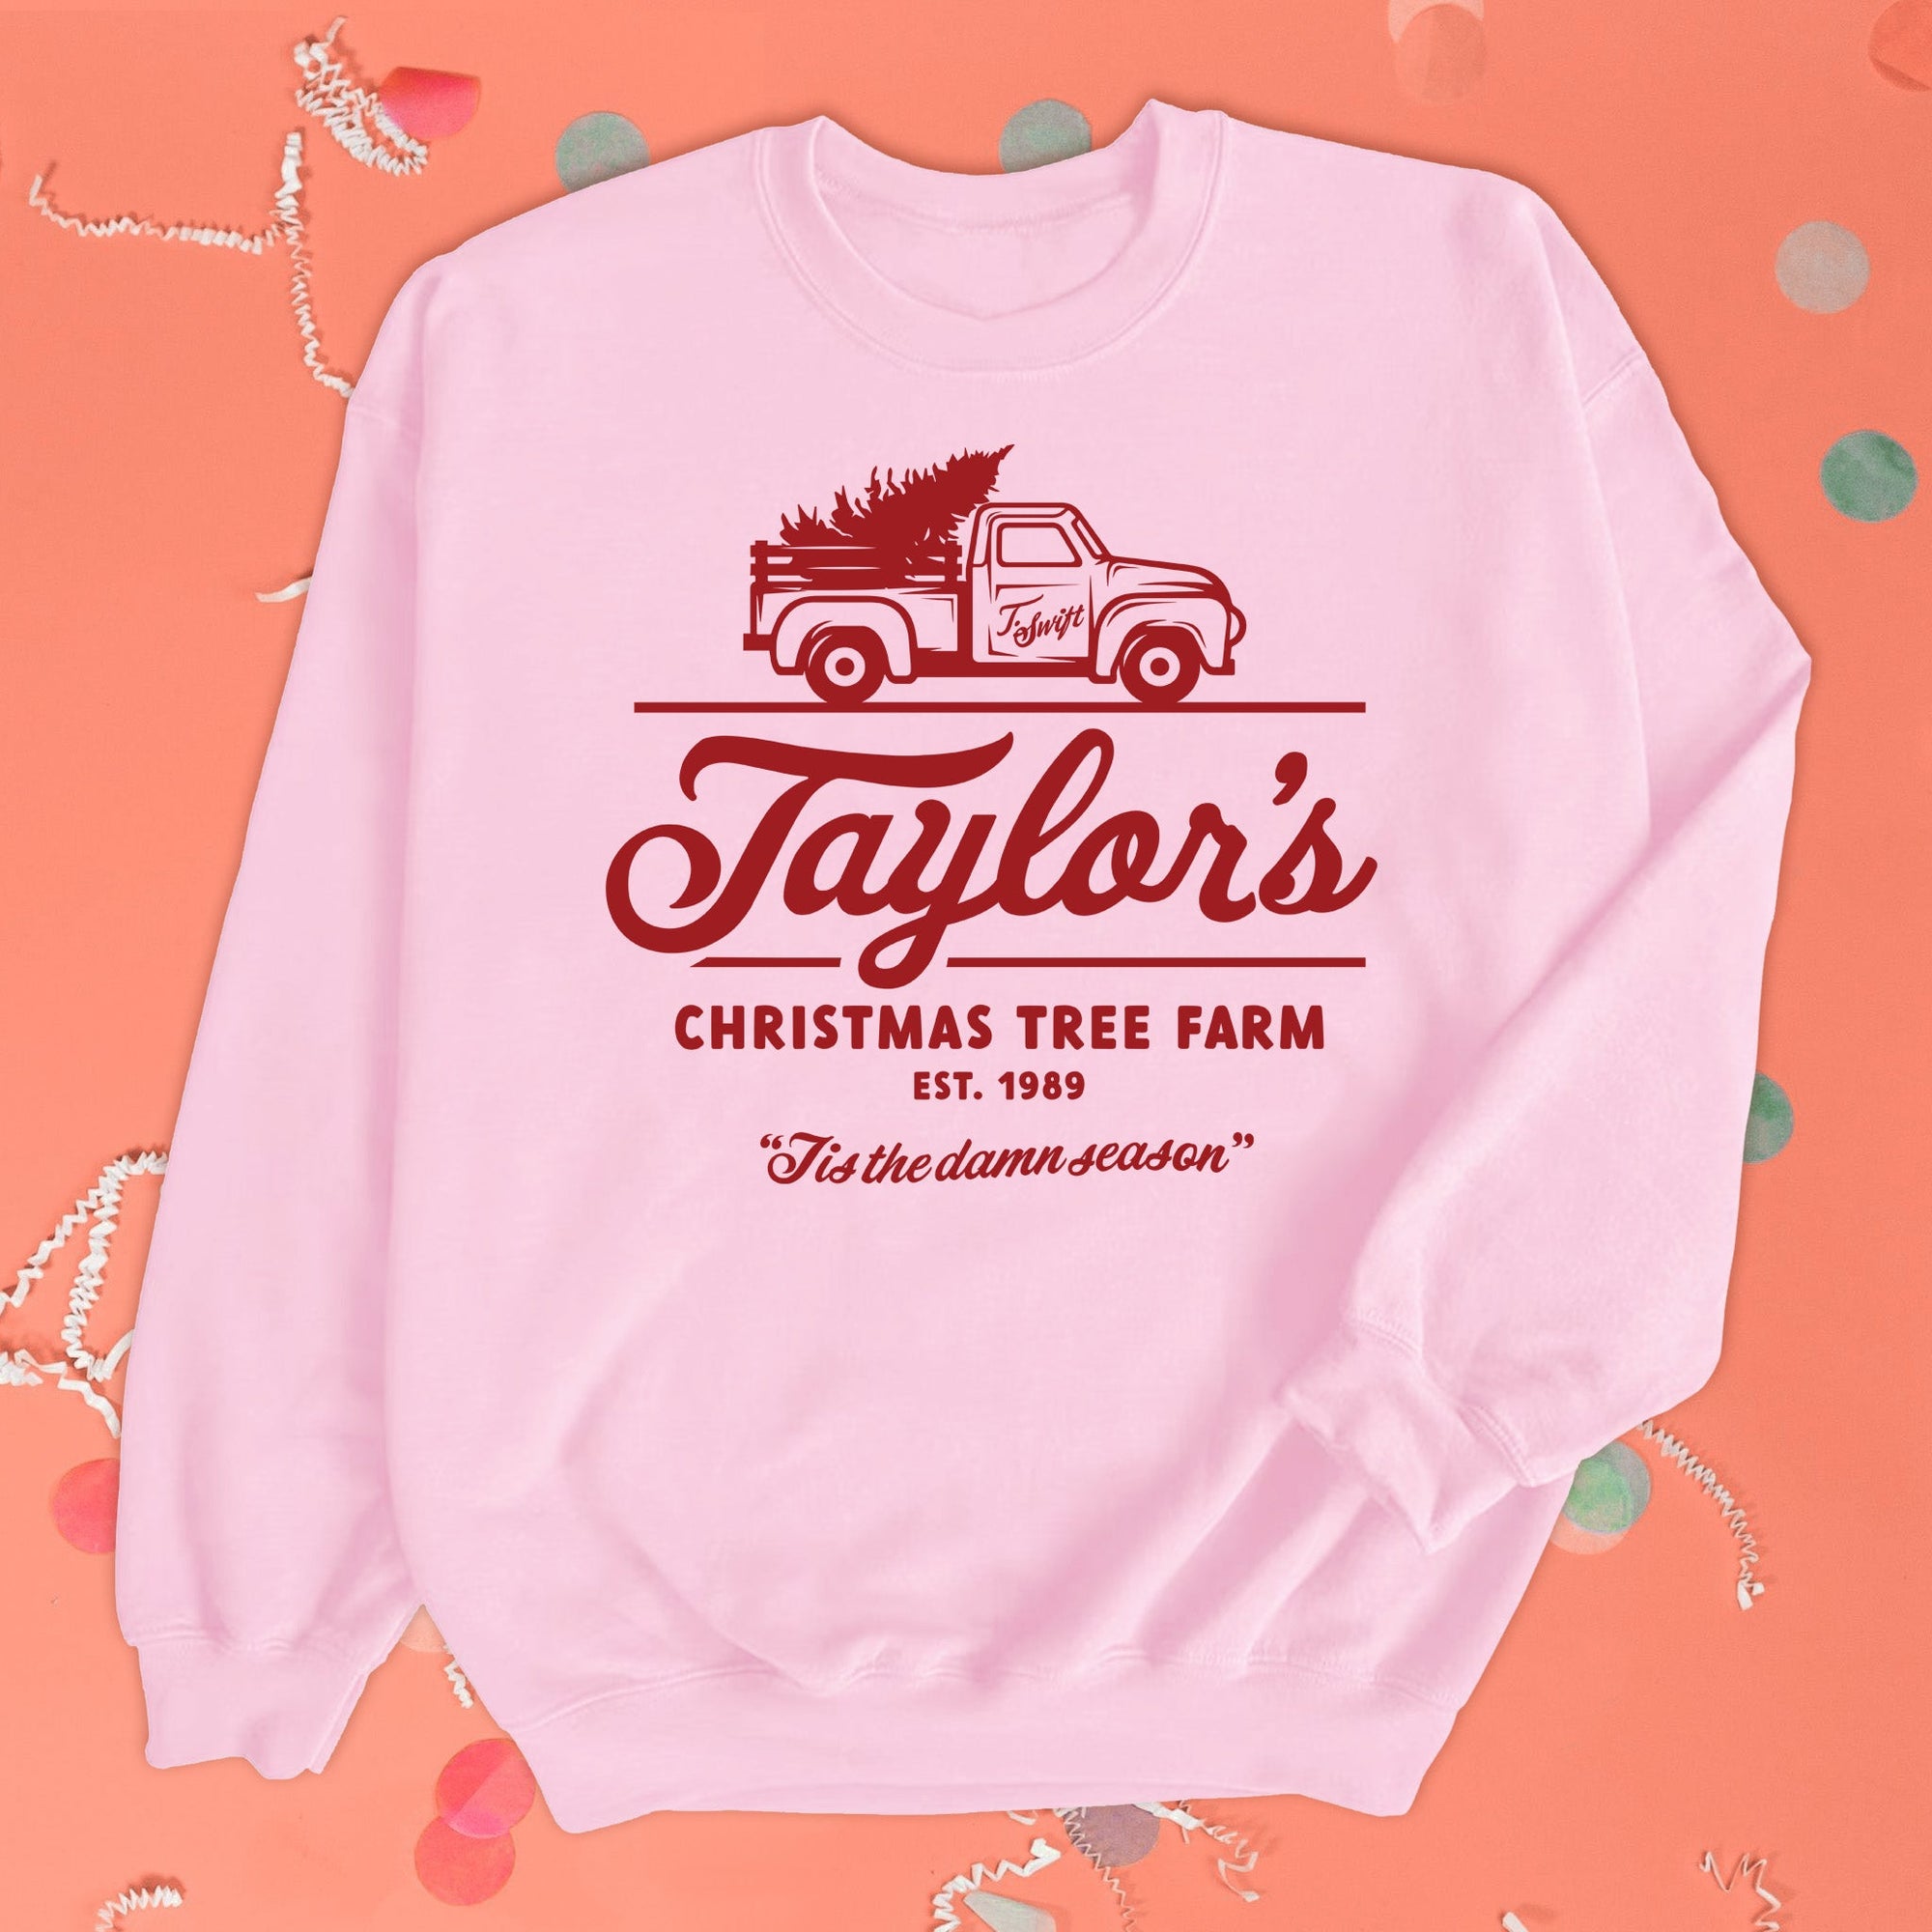 On a coral pink background sits a sweatshirt with white crinkle and big, colorful confetti scattered around. The Taylor Swift inspired pink, crew neck sweatshirt has a red vintage truck with a tree and it says "Taylor's CHRISTMAS TREE FARM EST. 1989" in red hand lettering and it also says "Tis the damn season" in red hand lettering at the bottom.